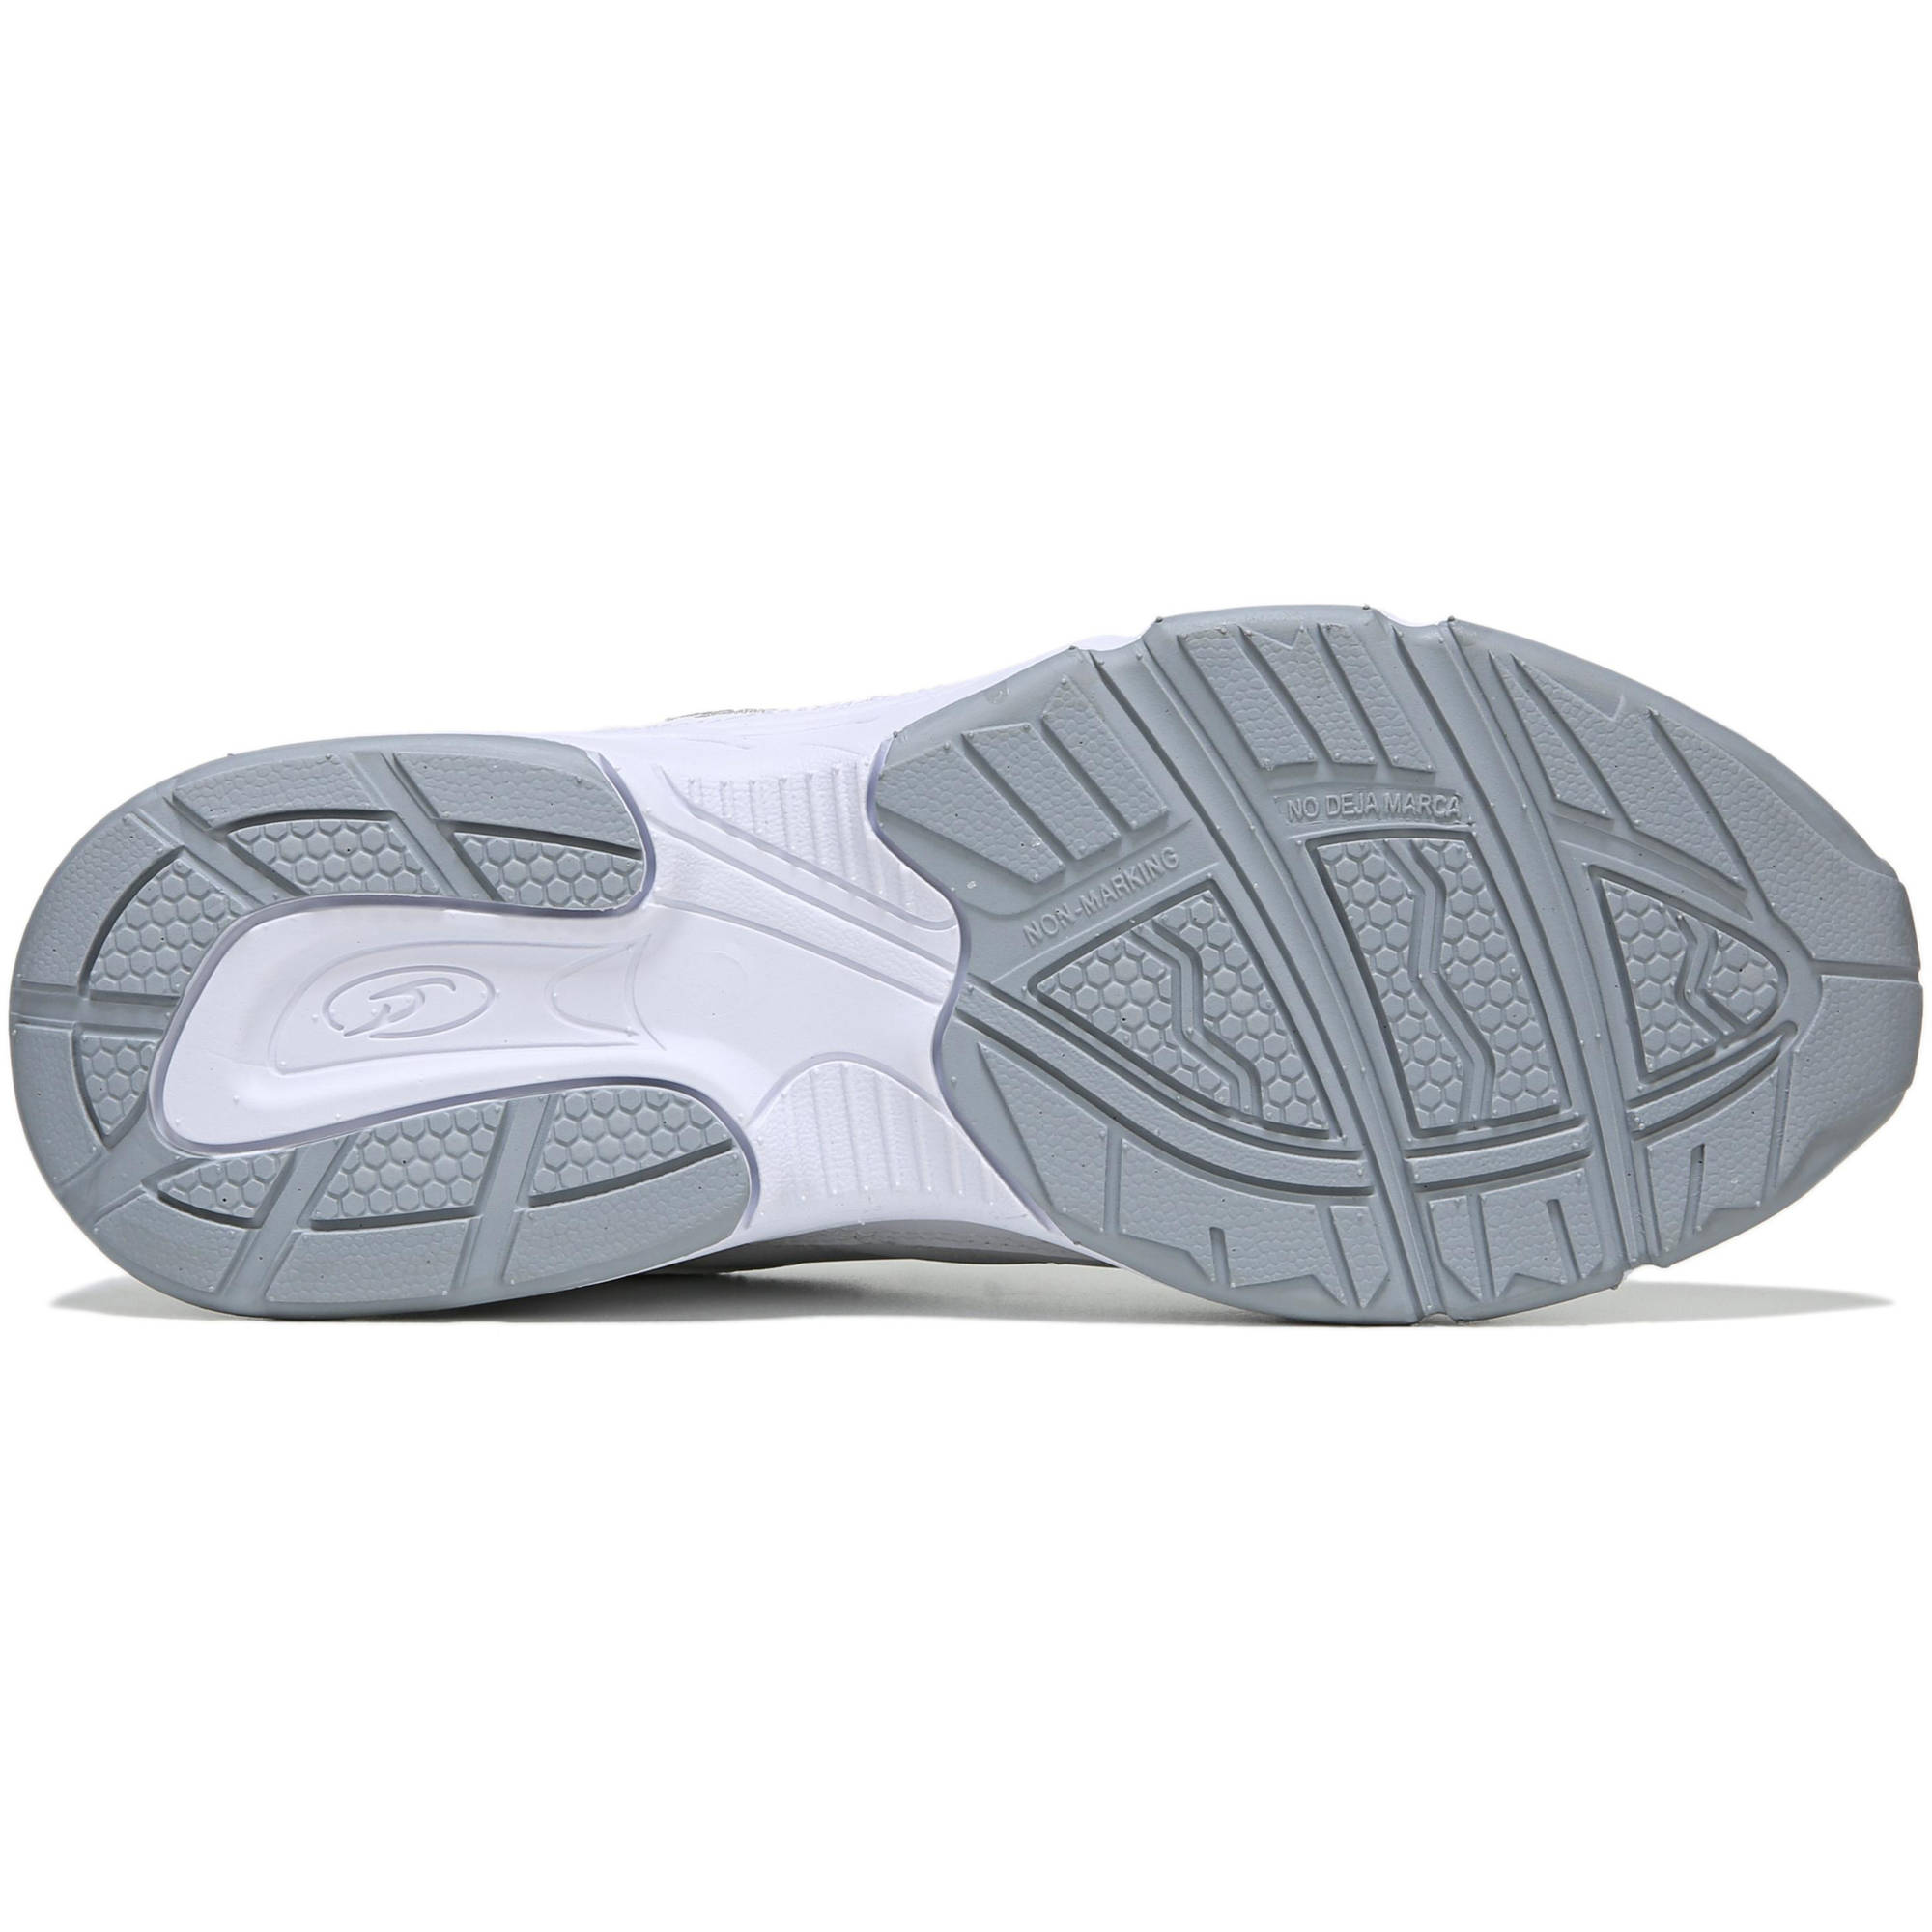 Dr. Scholl's Men's Brisk Sneakers (Wide Width Available) - image 5 of 5